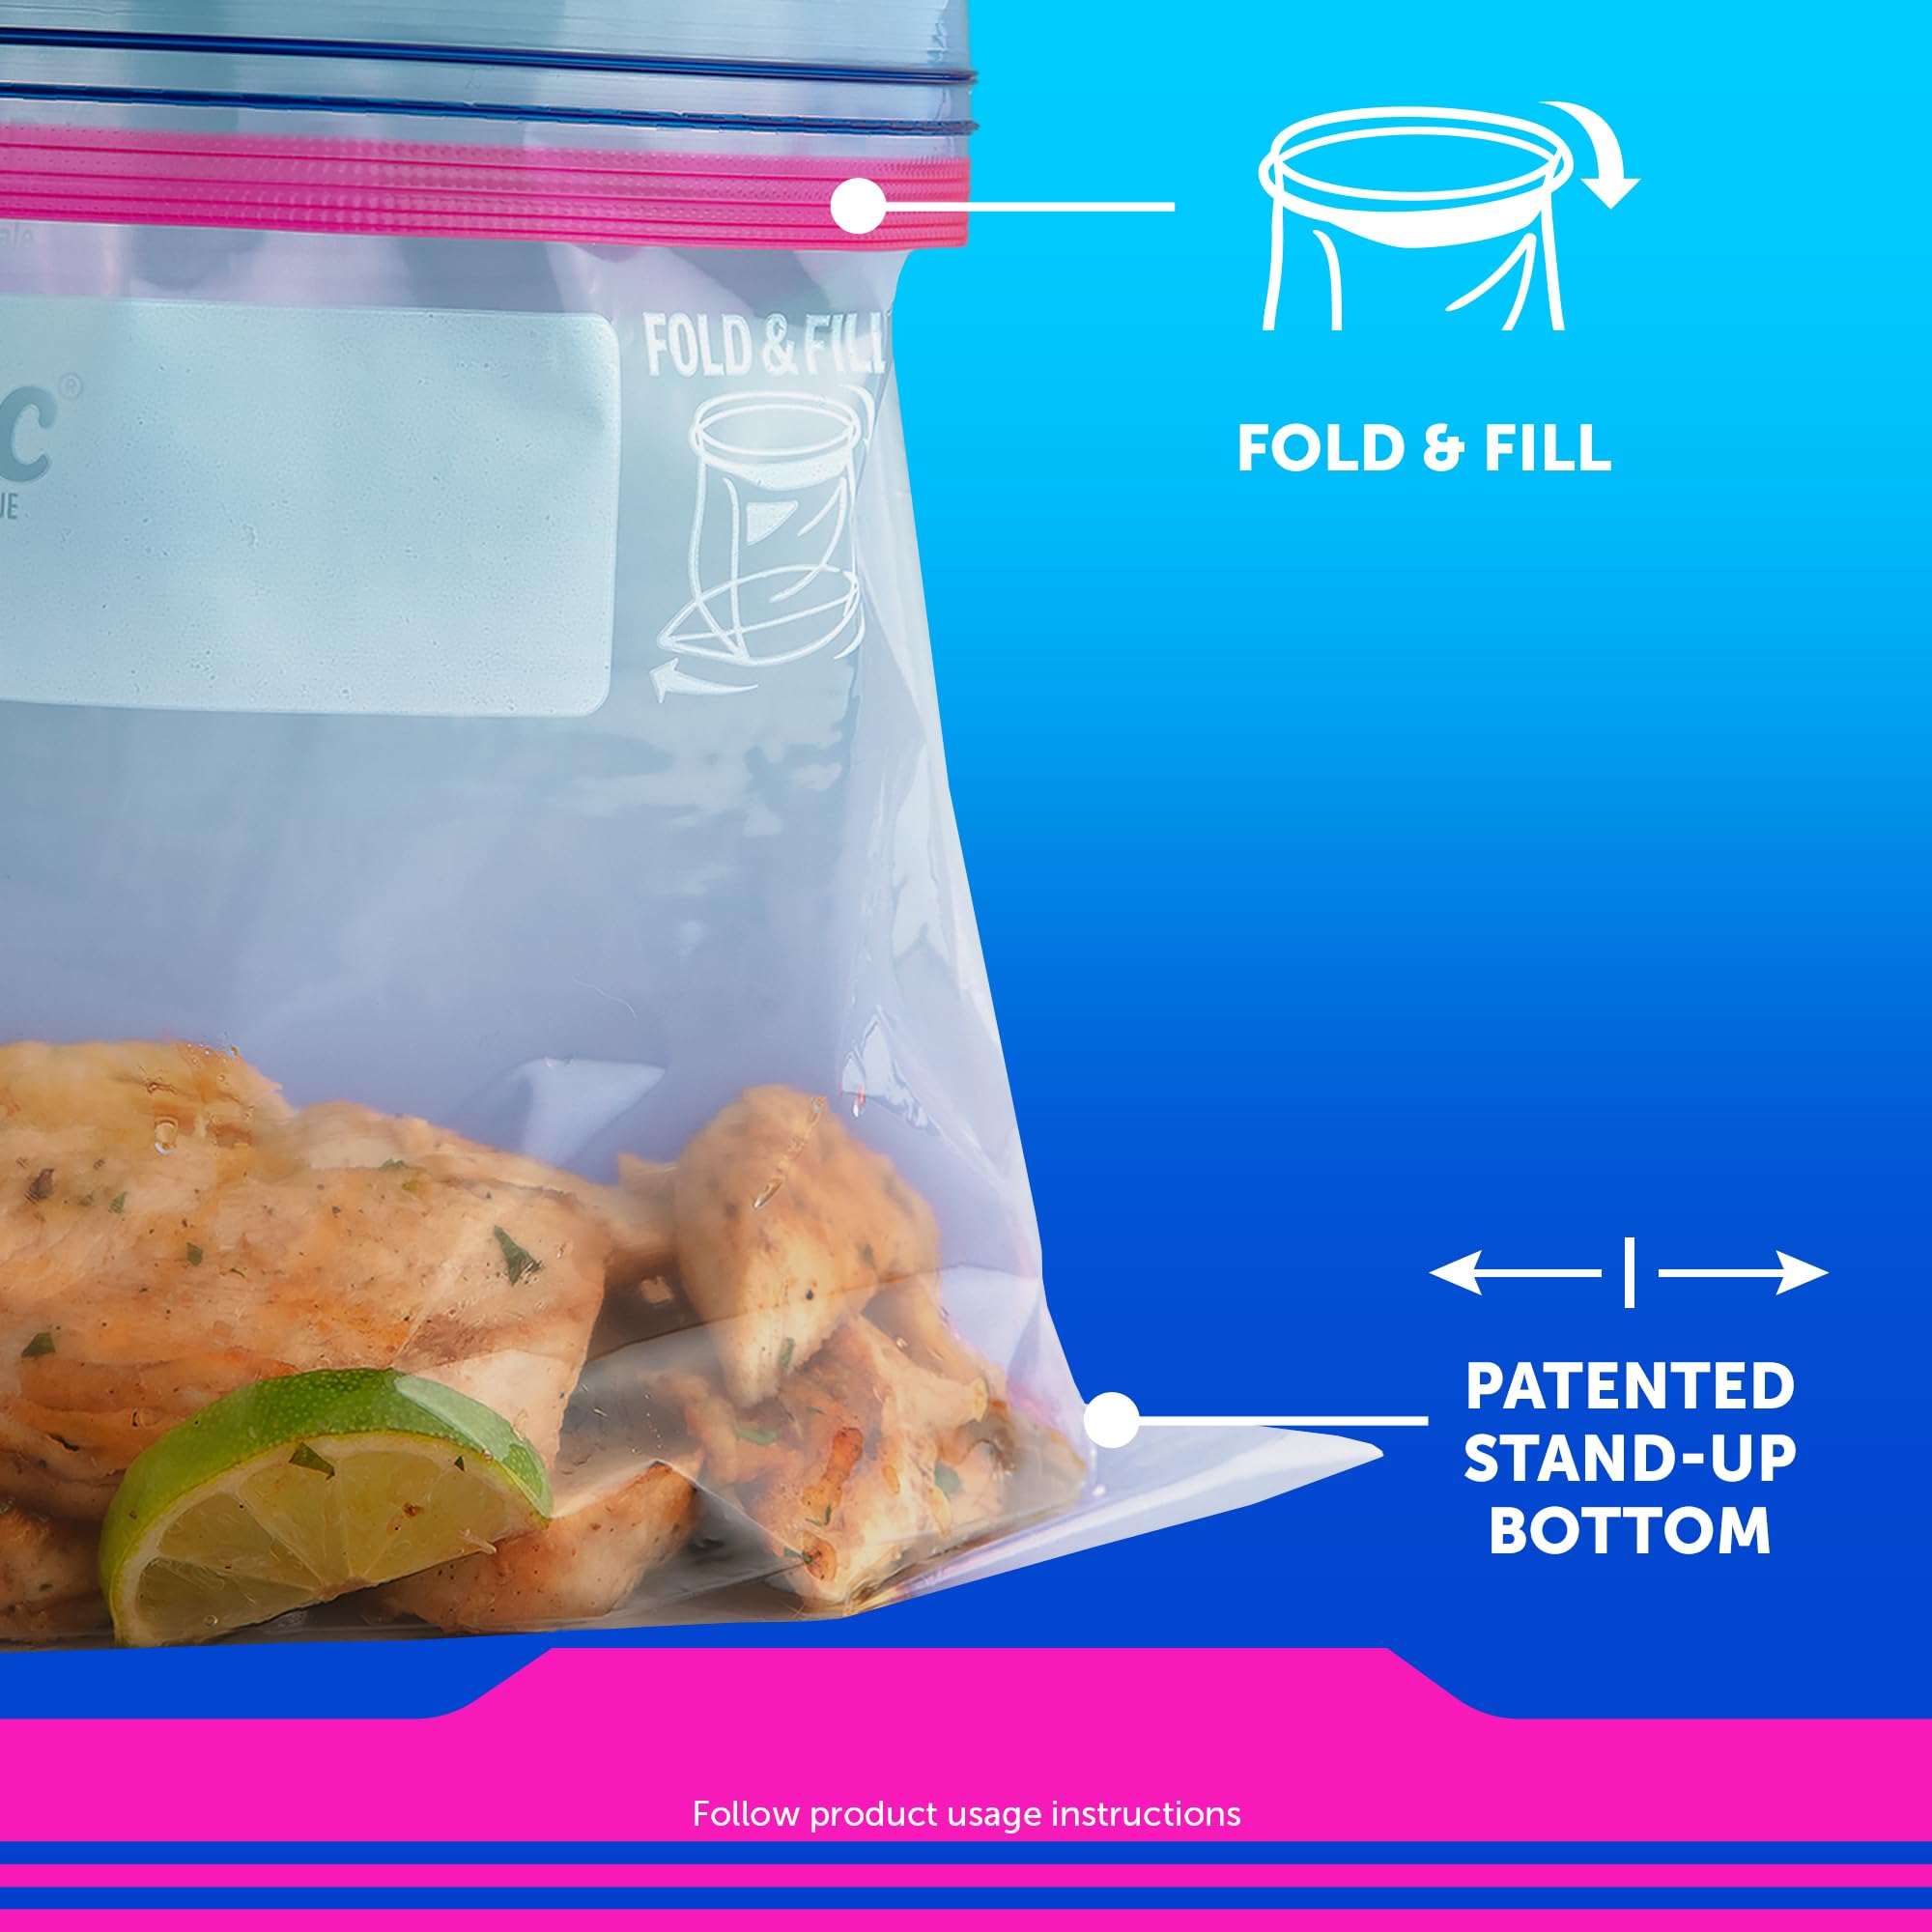 Ziploc Food Storage and Sandwich Bags Variety Pack, New Stay Open Design with Stand-Up Bottom, Easy to Fill, 166 Bags Total